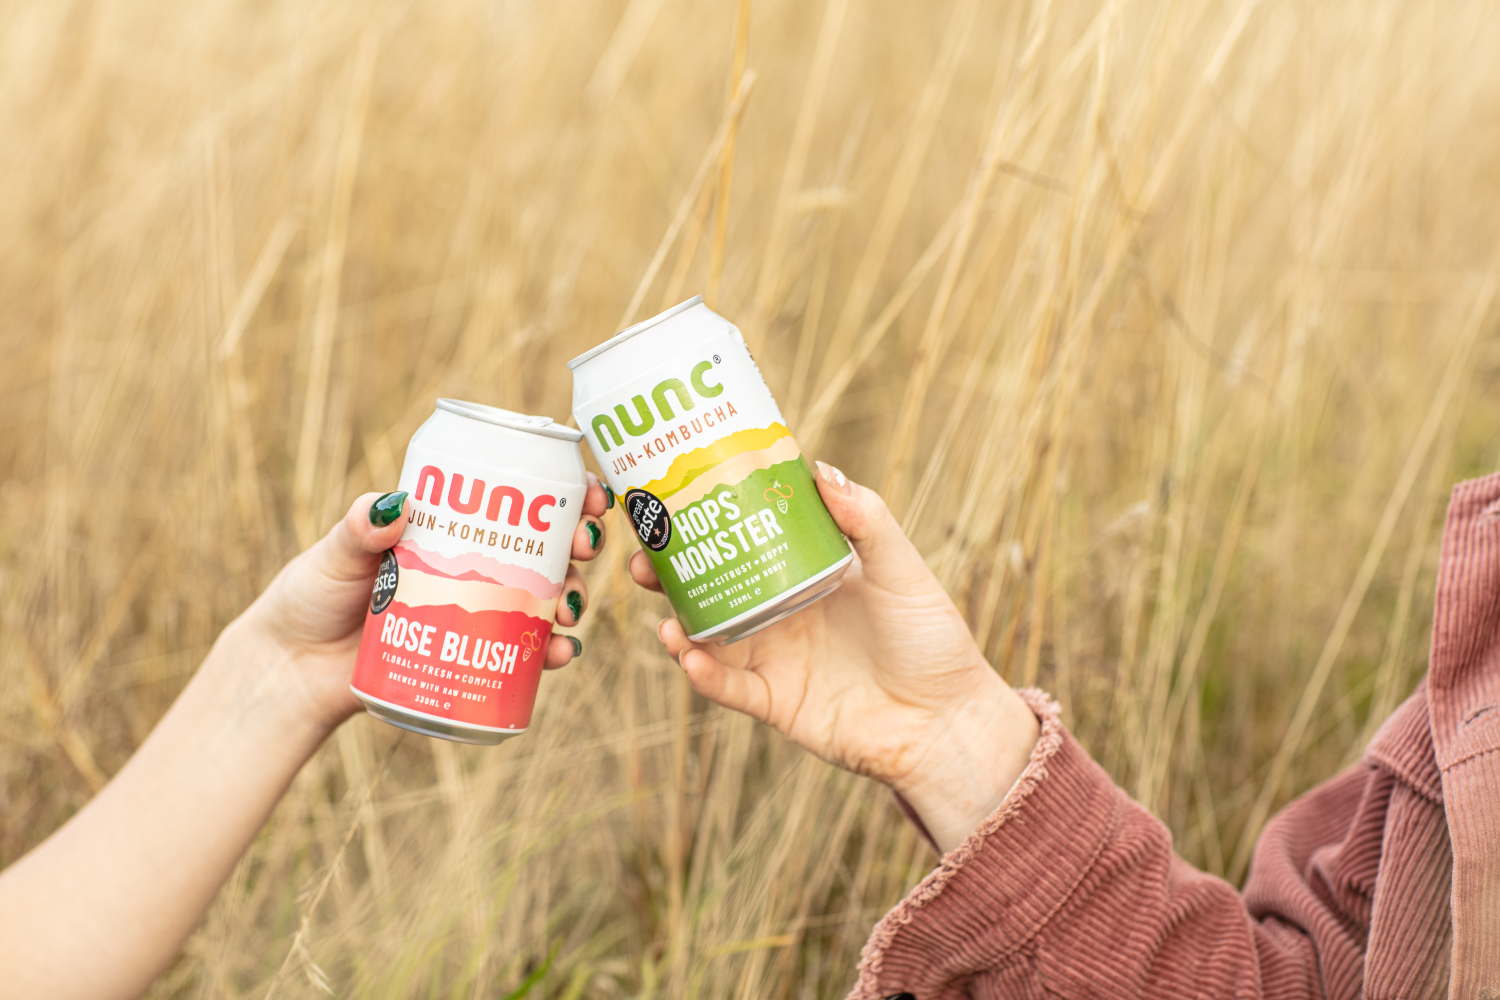 Even natural flavourings are made with 90% chemicals, so if you are going to drink make it as good for you as possible. Nunc Jun-Kombucha is packed full of beneficial acids, antioxidants, enzymes and more